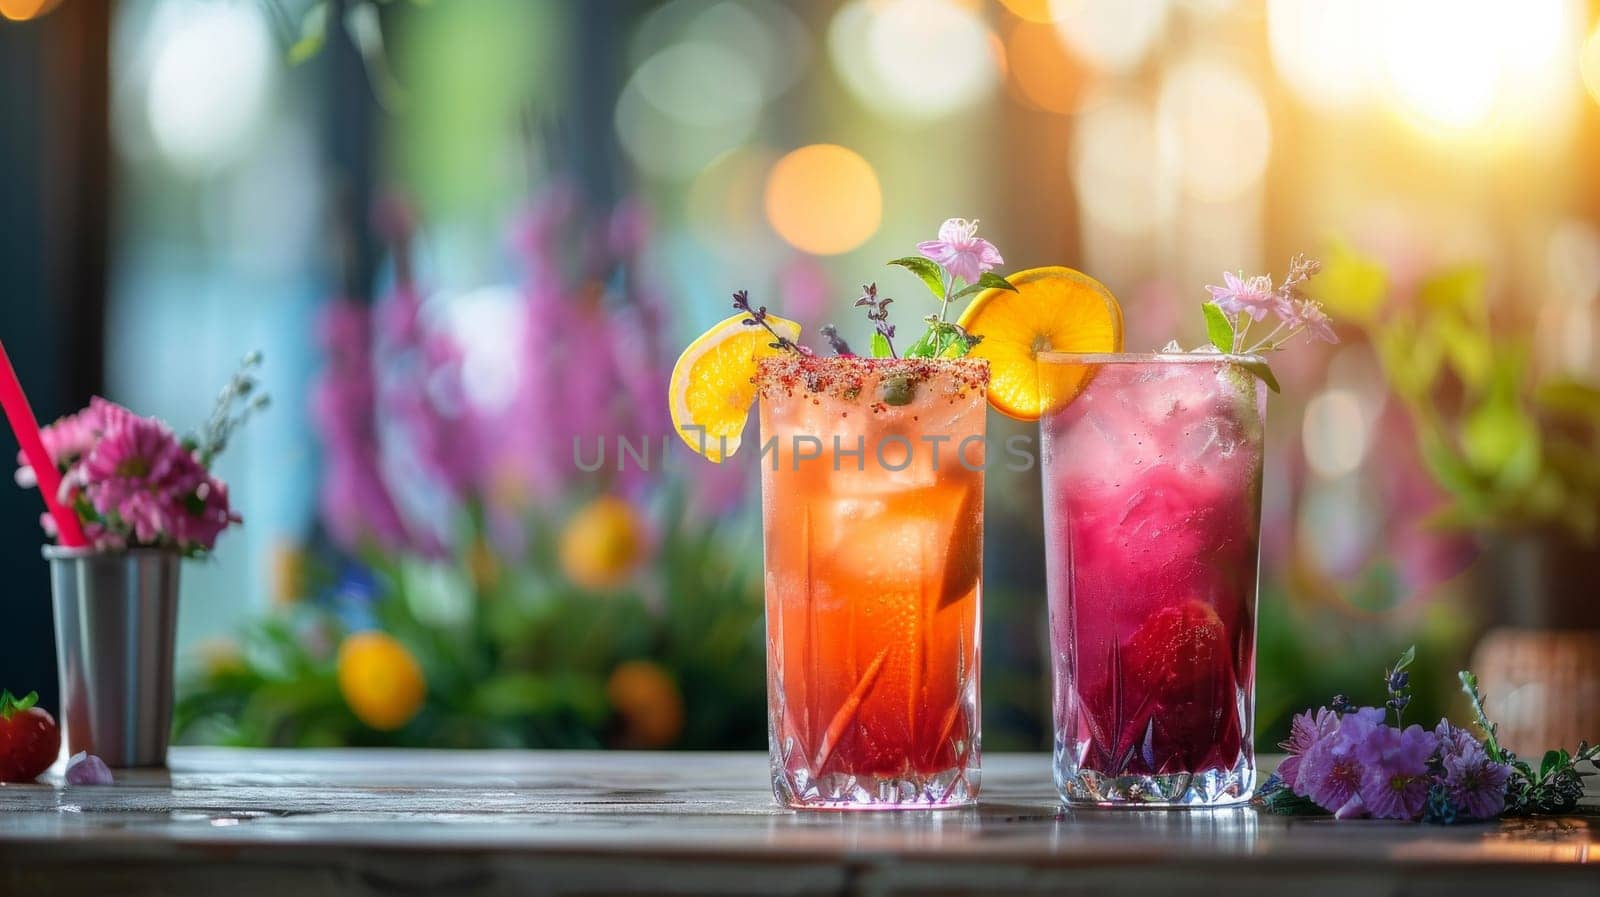 Two colorful drinks with flowers in the background by itchaznong